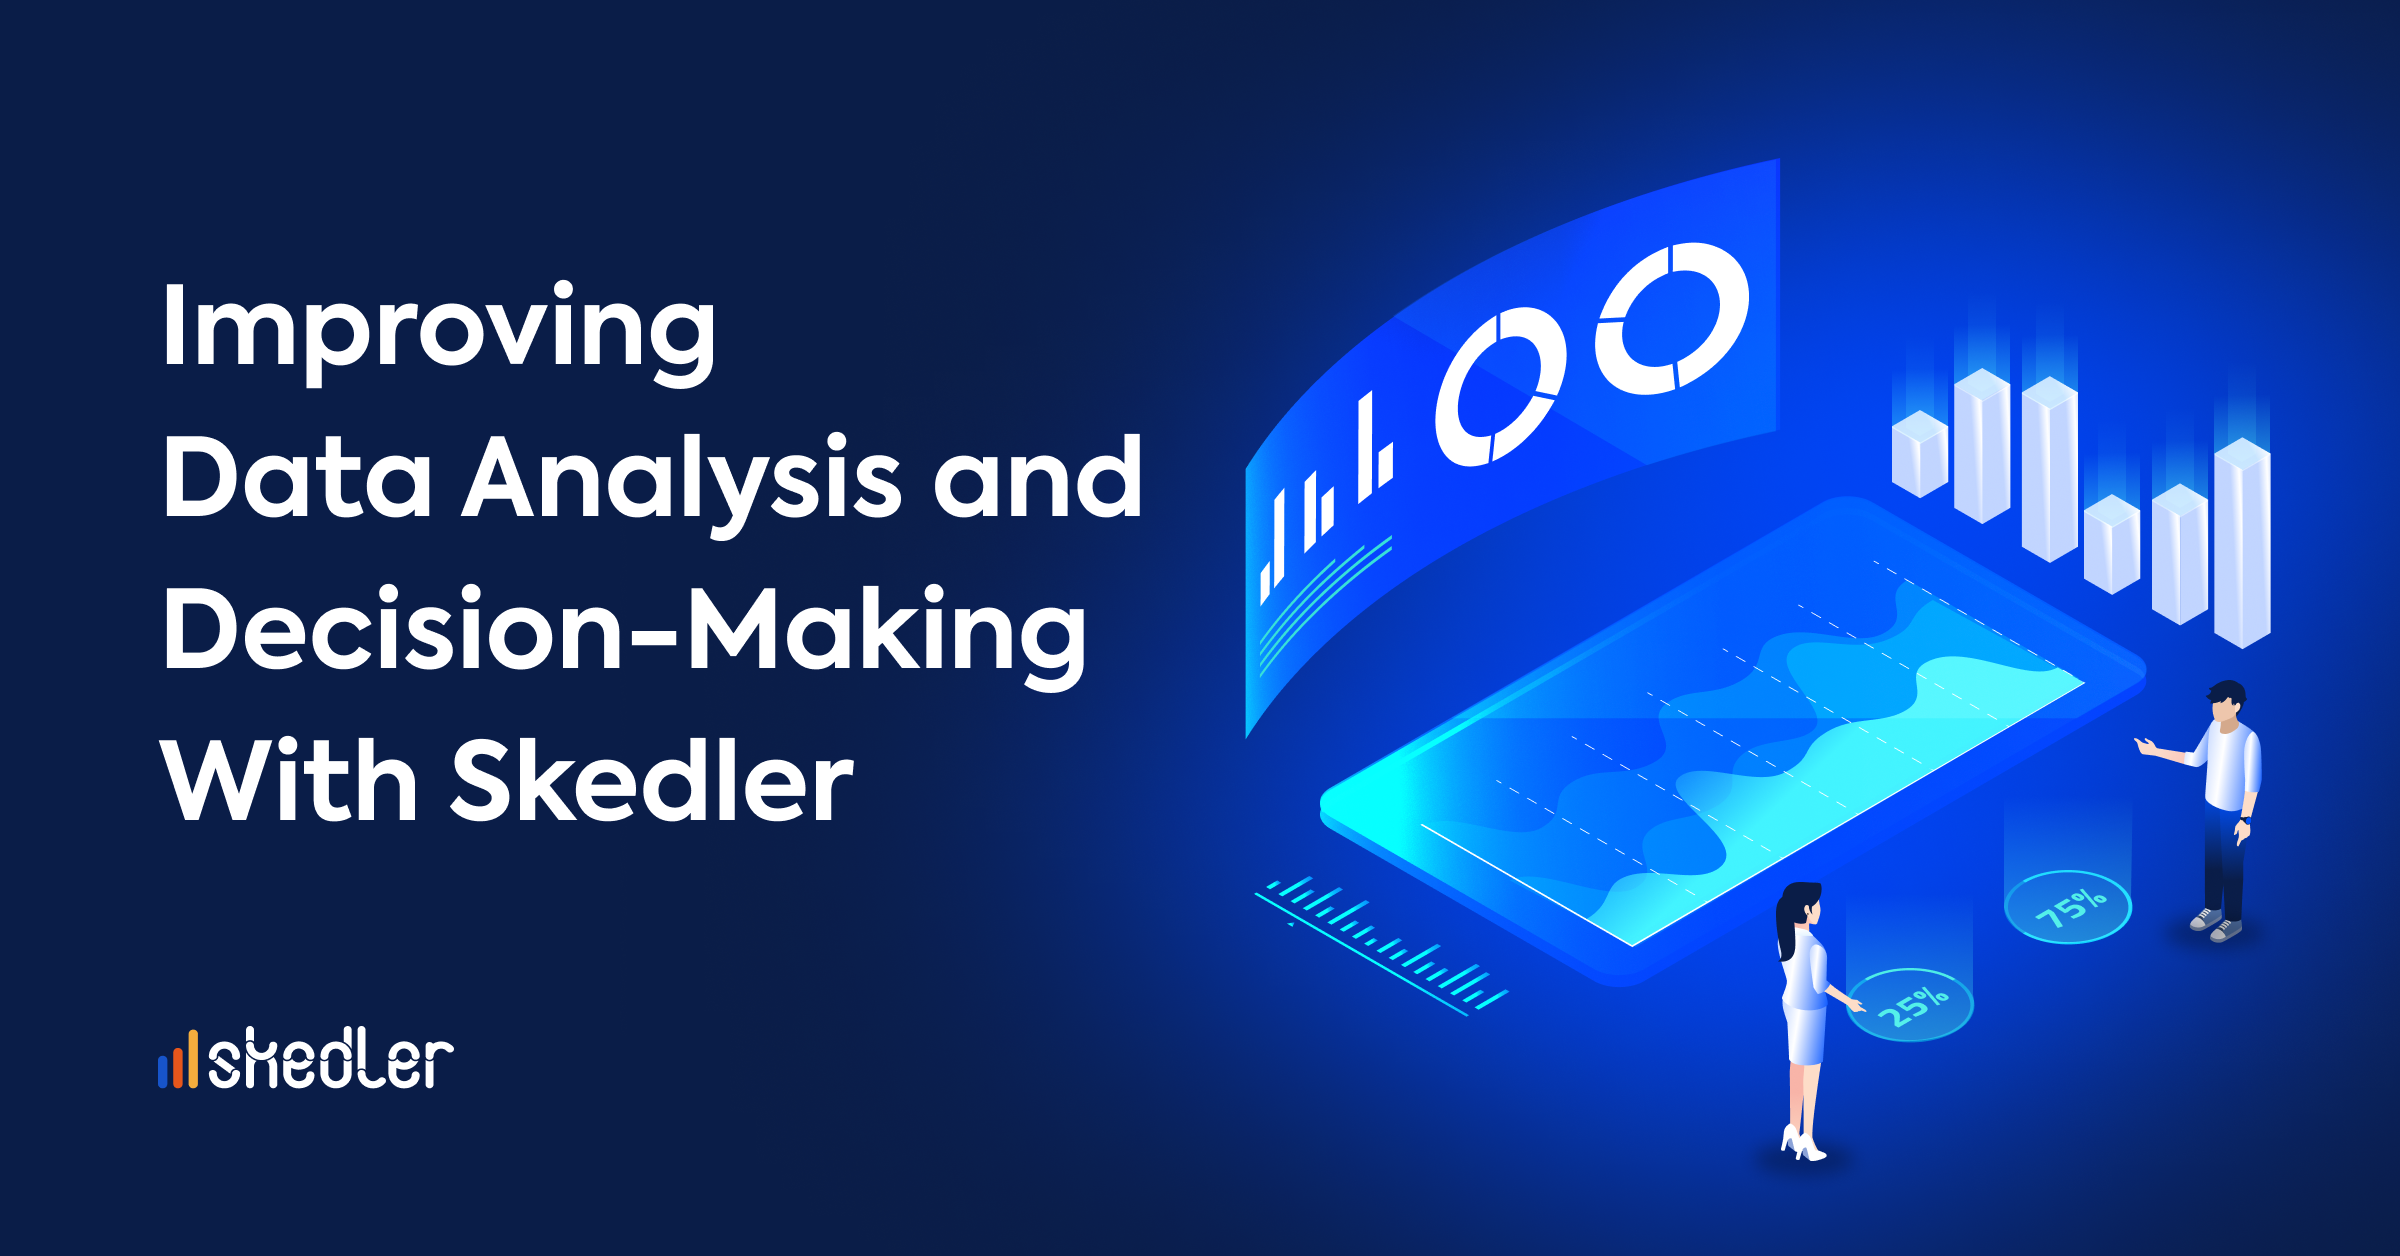 Improving Data Analysis and Decision-Making With Skedler